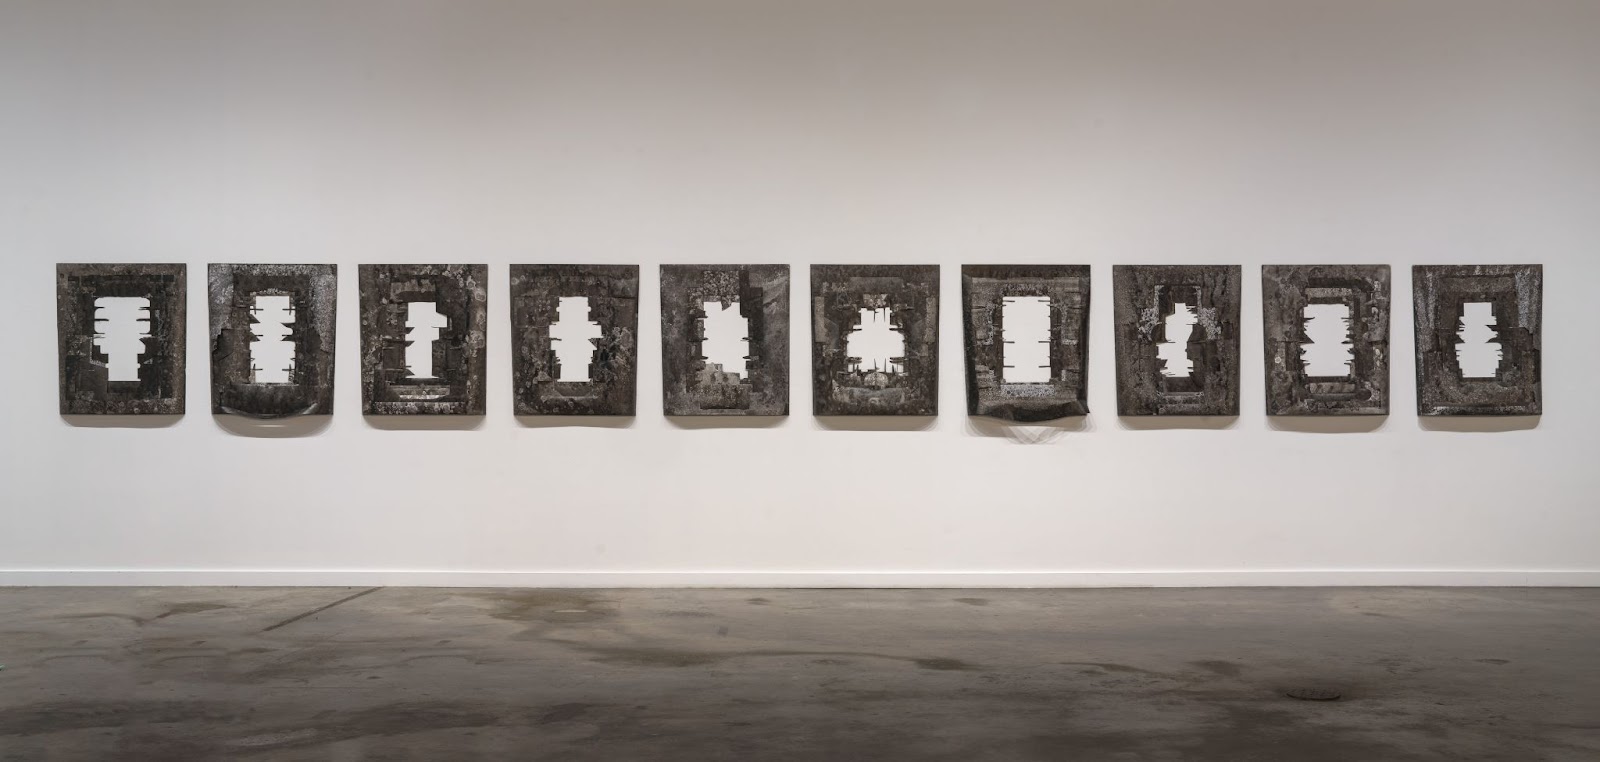 Image: Installation view, Yoonmi Nam, Generally Meant to be Discarded. The negative Tyvek® cuts from the Delivered and Discarded series, treated with sumi ink and alcohol based sanitizer are displayed on the wall. Image courtesy of the artist, photo taken by E.G. Schempf